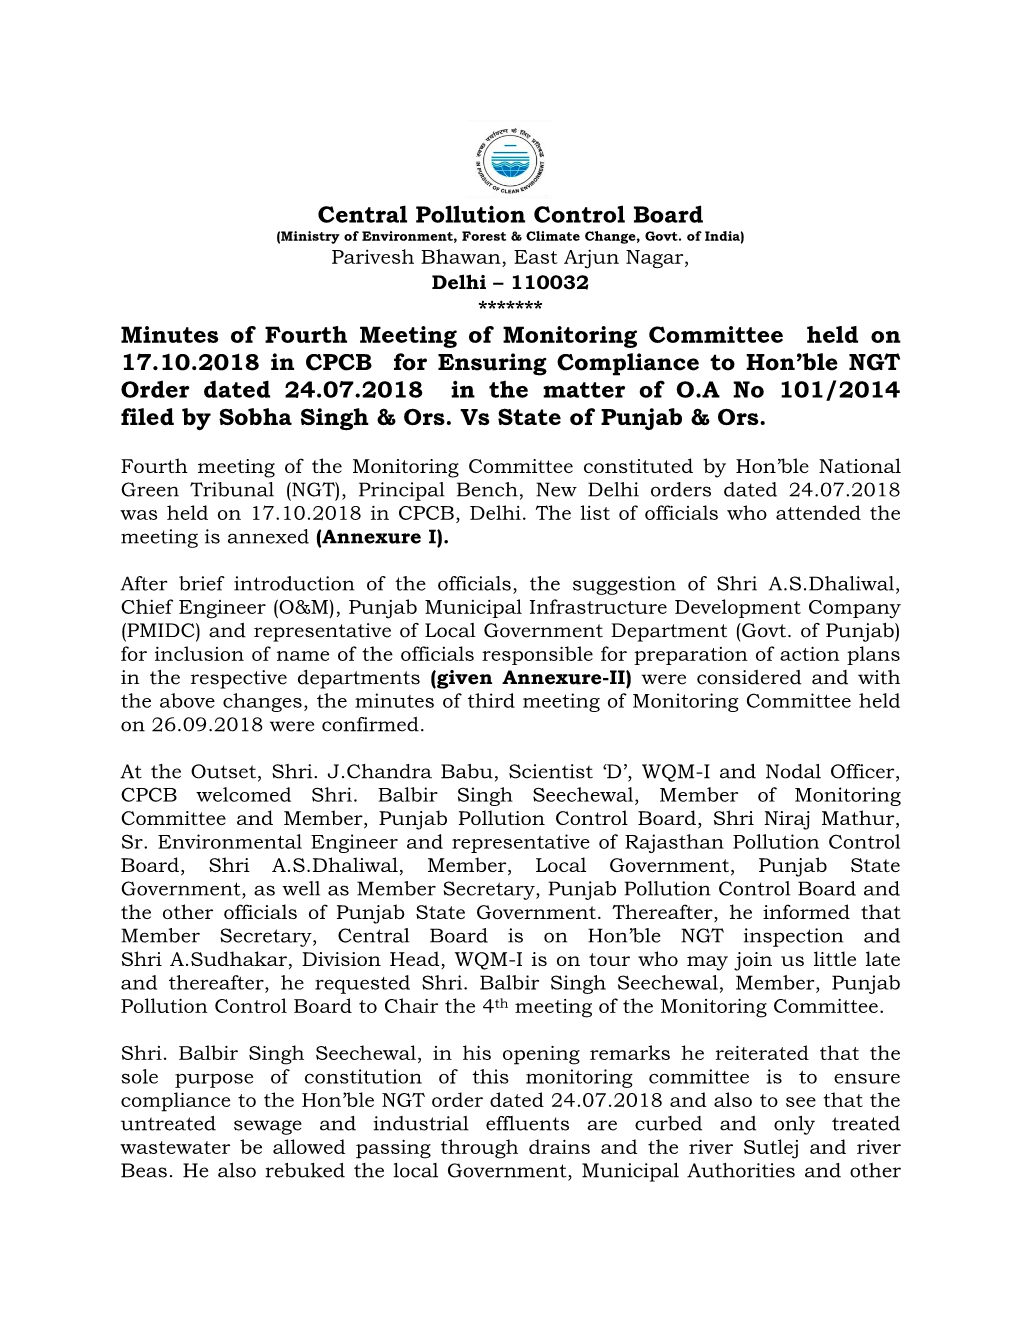 Central Pollution Control Board Minutes of Fourth Meeting Of